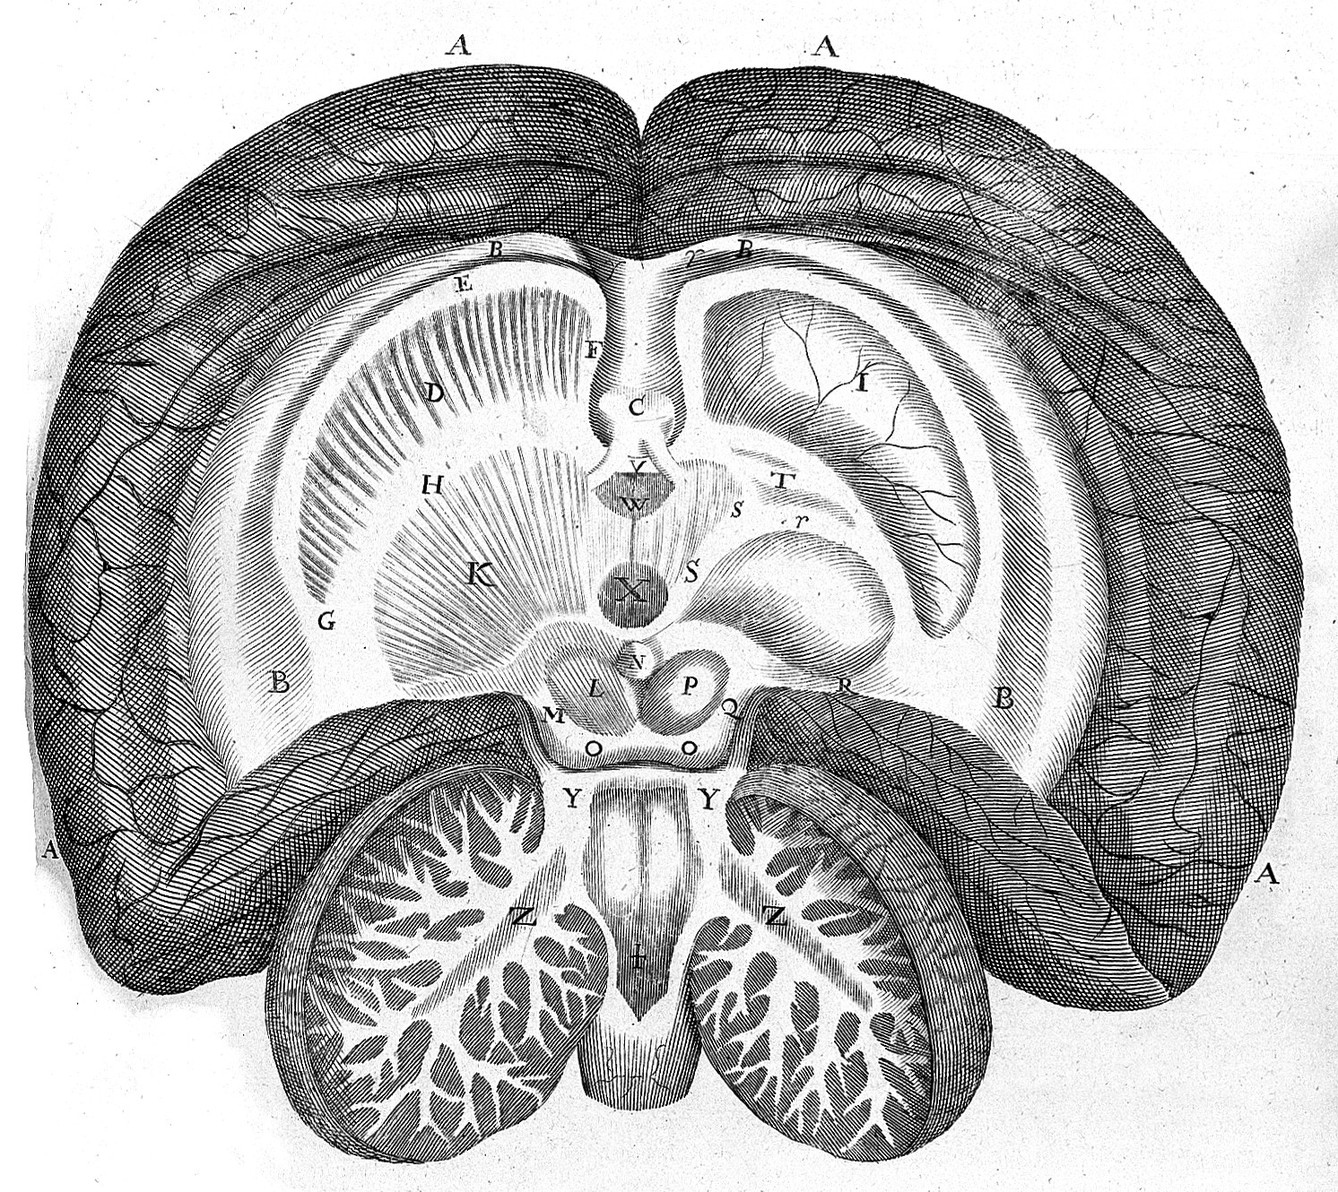 Large black and white diagram of a side dissection view of the brain with letters as labels